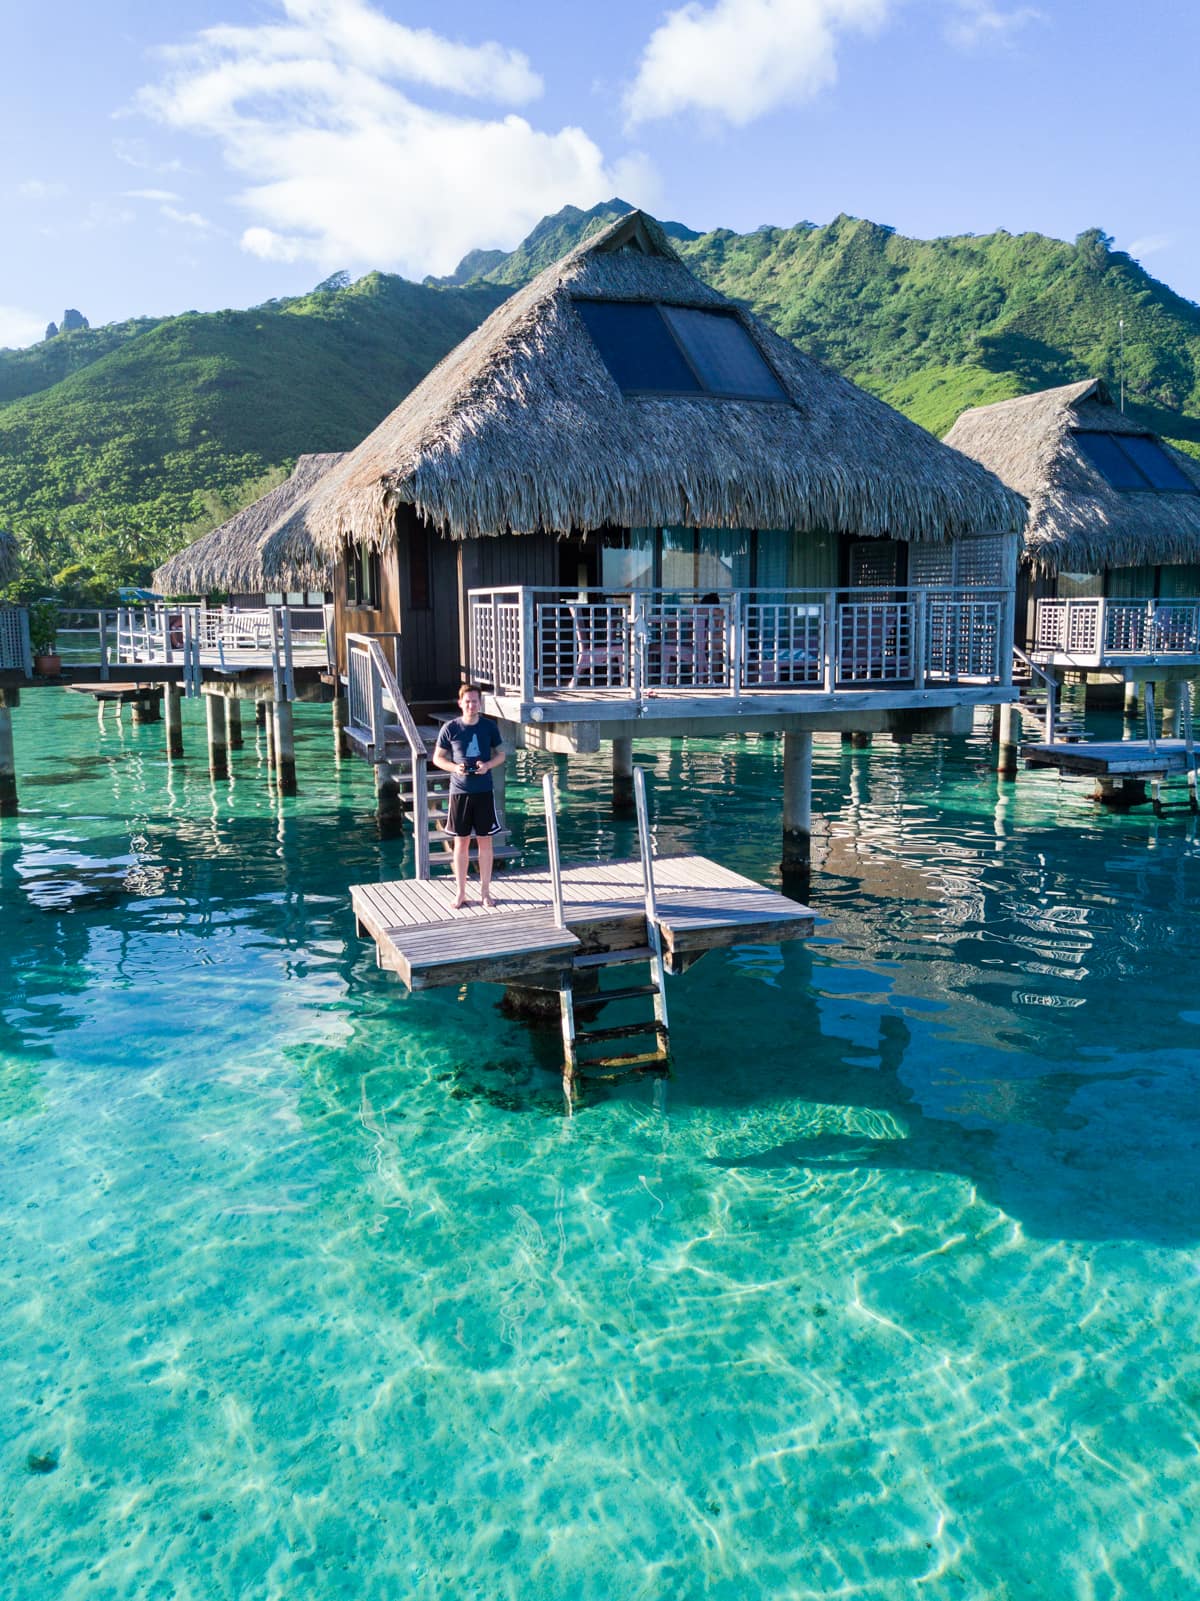 Our Honeymoon Part 1: Guide to Moorea French Polynesia by top Houston lifestyle blogger, Ashley Rose of Sugar and Cloth